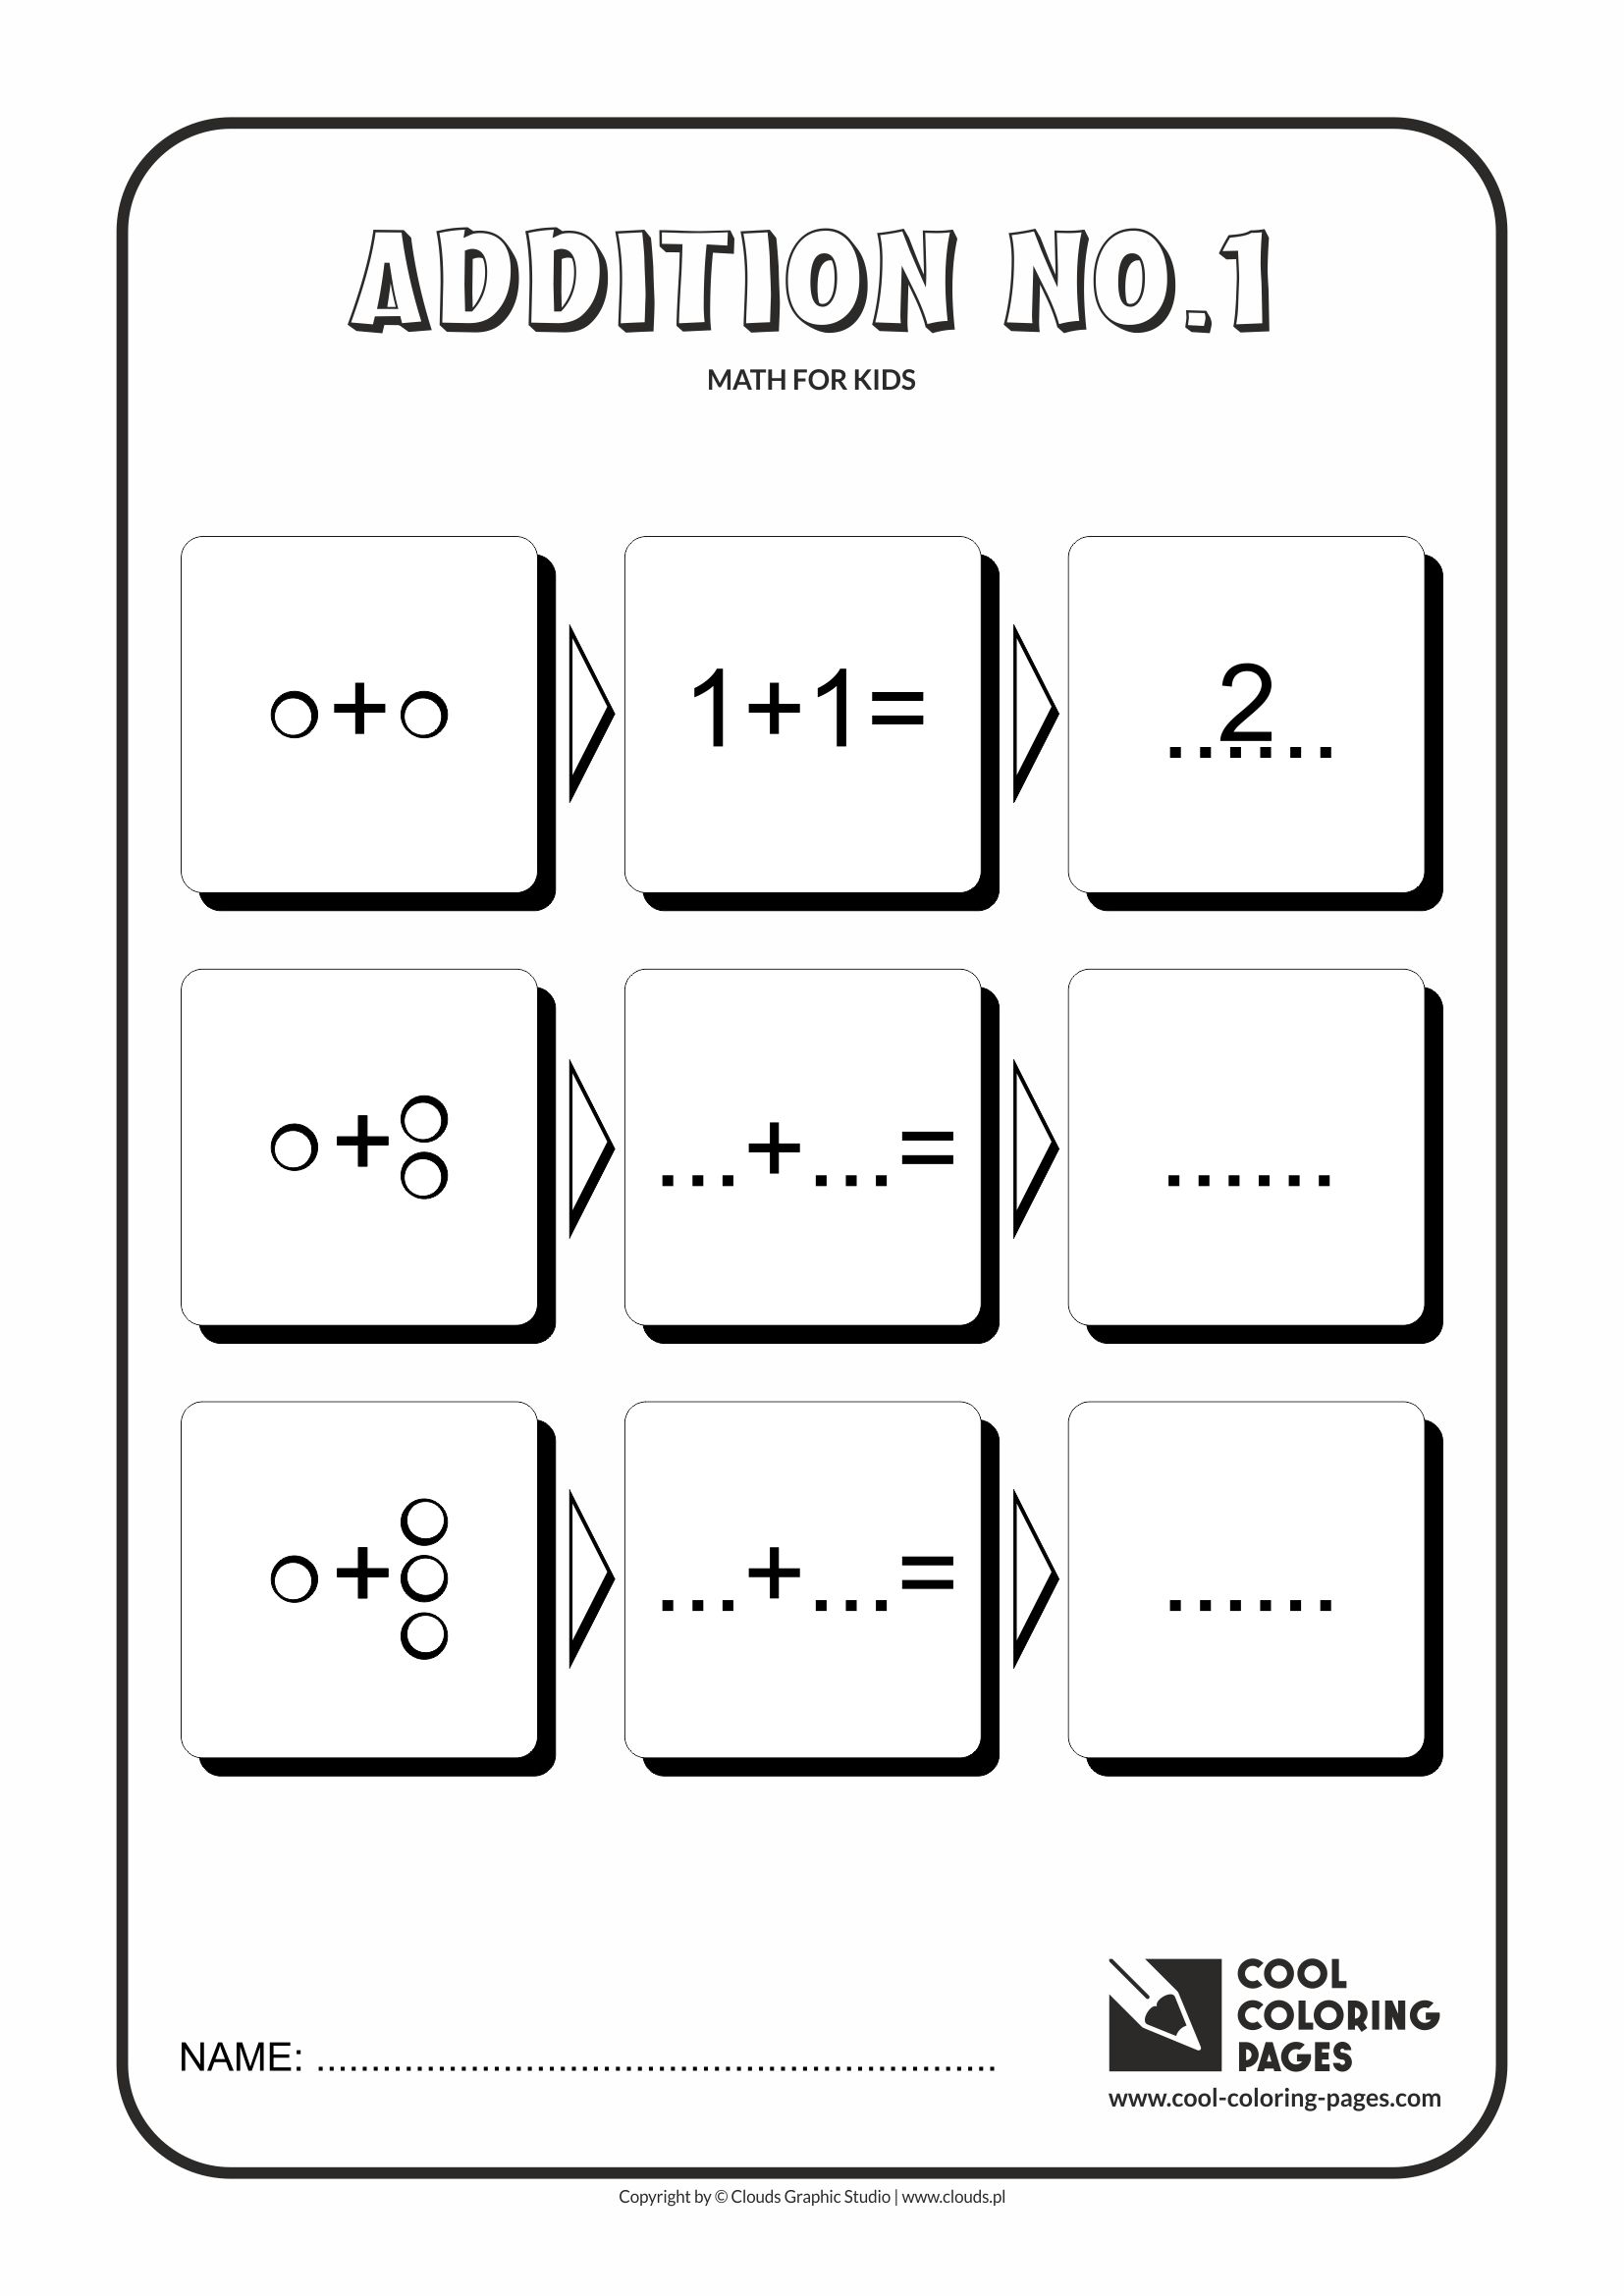 Cool Coloring Pages - Math for kids / Addition no.1